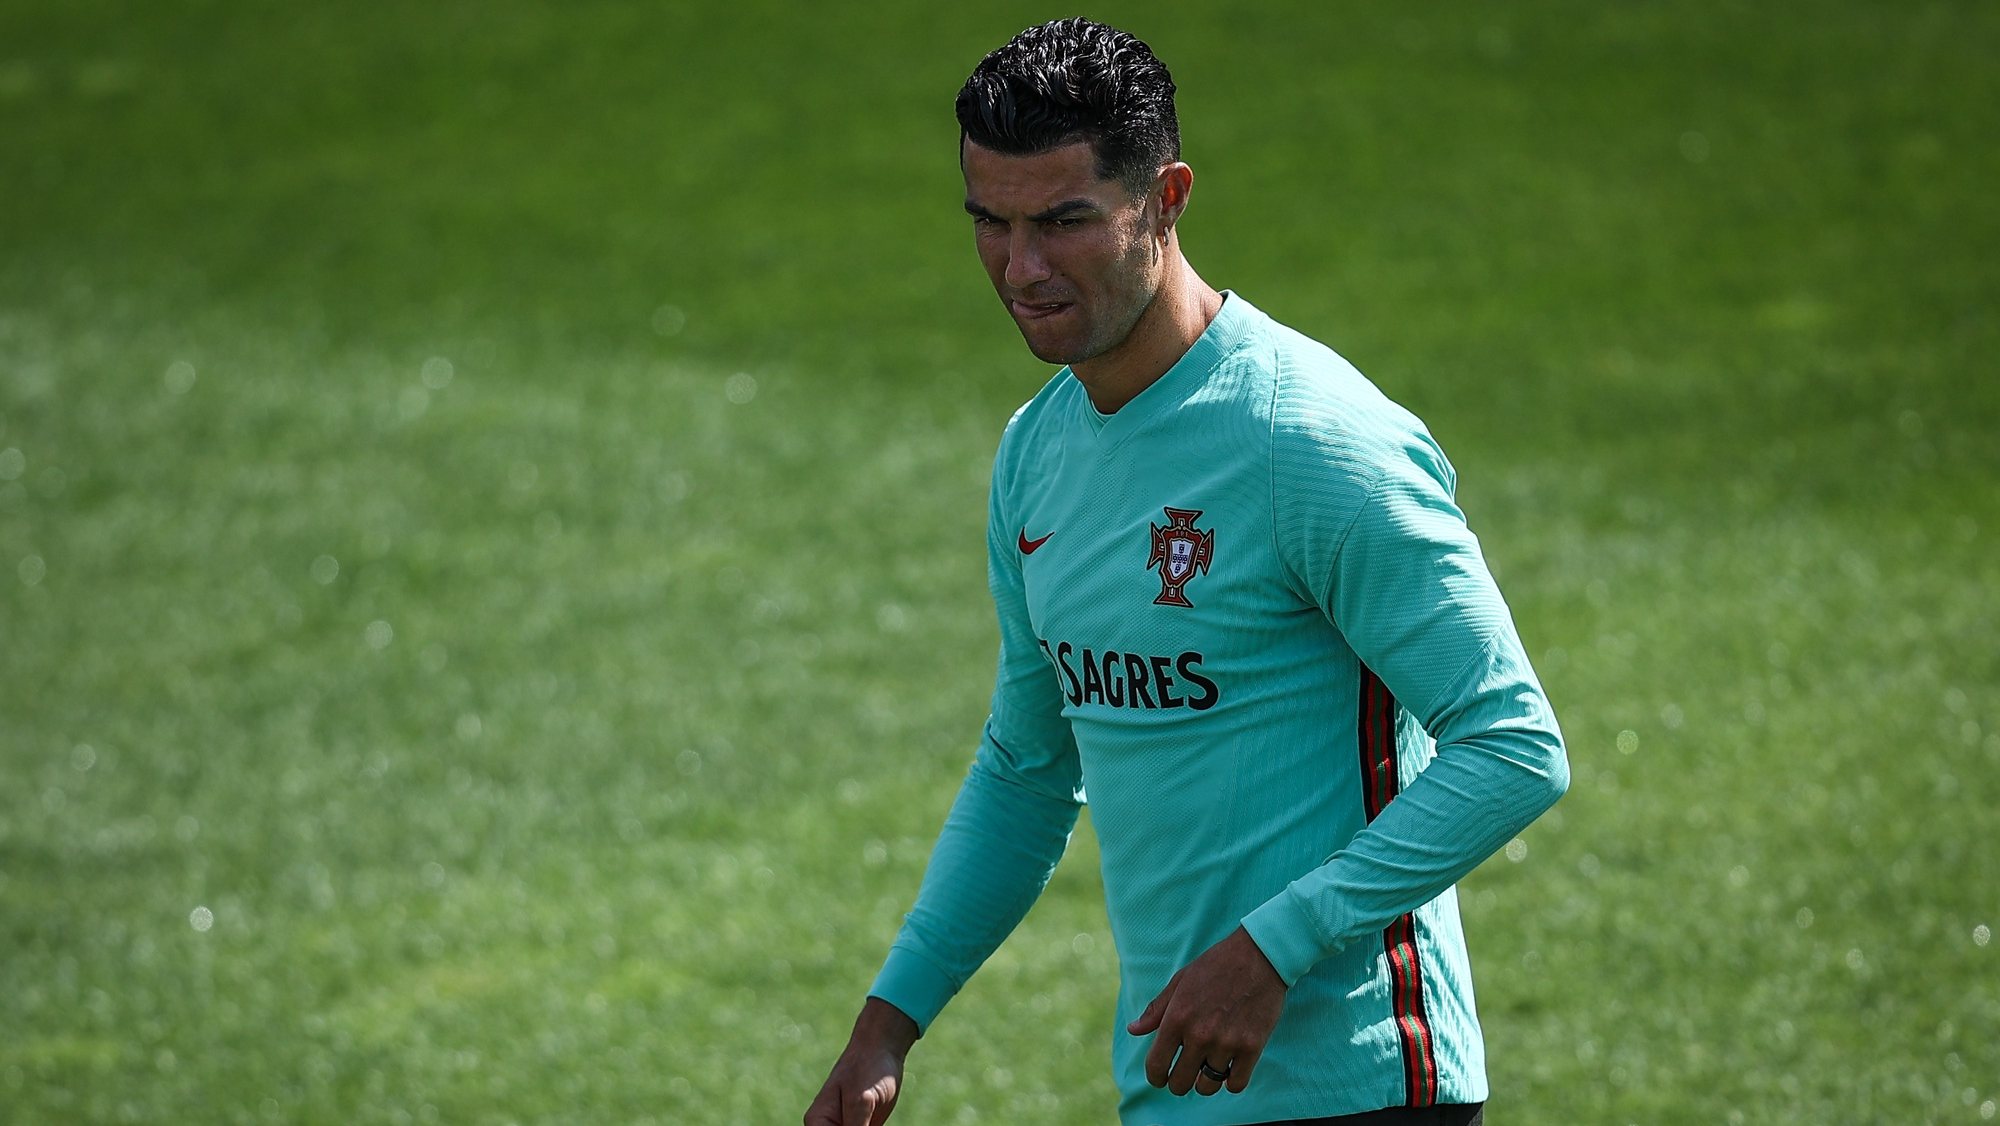 Portugal soccer team player Cristiano Ronaldo during a training session at Cidade do Futebol in Oeiras, outskirts of Lisbon, Portugal, 08 June 2022. Portugal will play against the Czech Republic on 09th June and Switzerland on 12th June for the upcoming UEFA Nations League. RODRIGO ANTUNES/LUSA